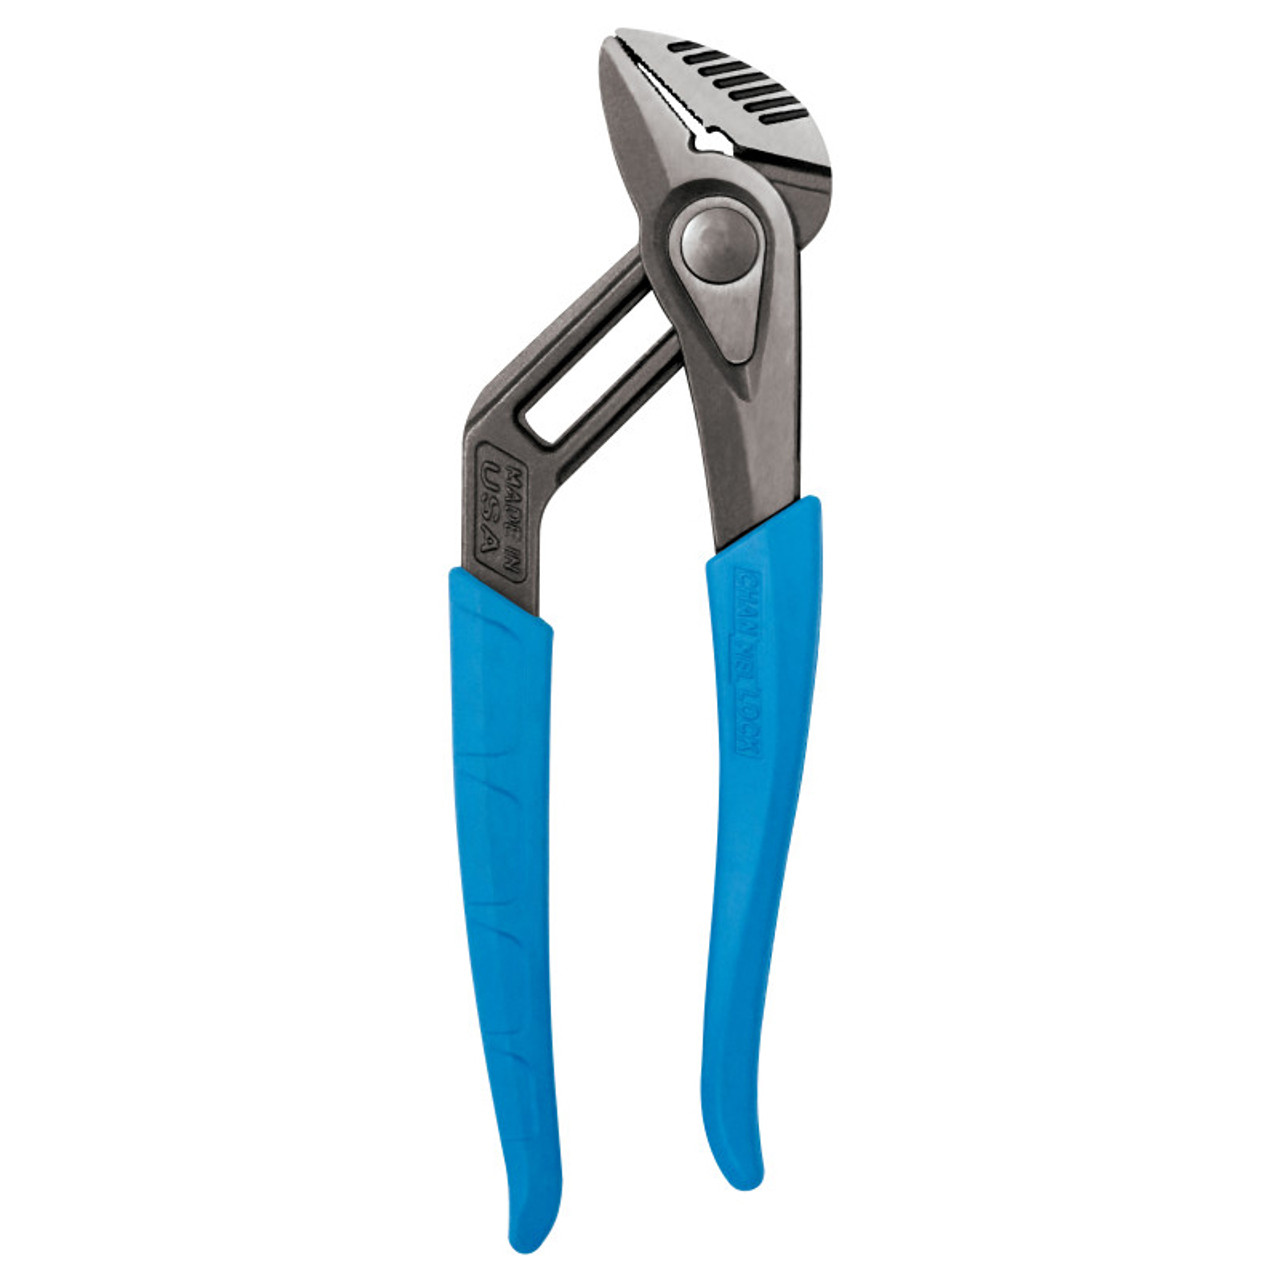 Channellock SpeedGrip 10 in. Tongue and Groove Pliers